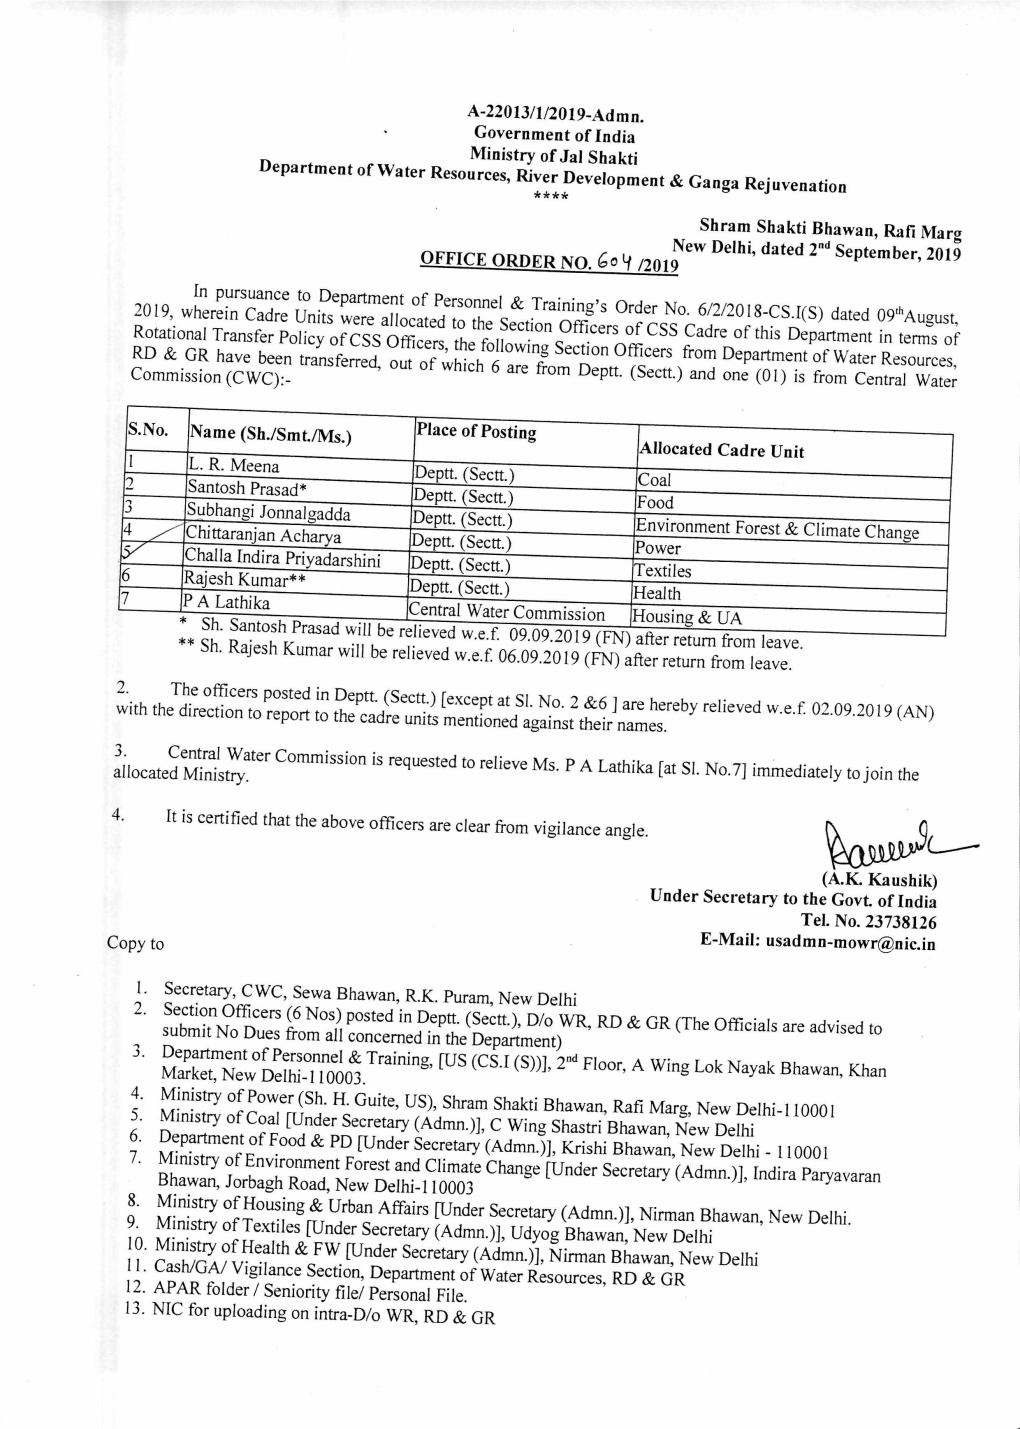 A-22013/1/2019-Admn. Government of India Ministry of Jal Shakti Department of Water Resources, River Development & Ganga Rejuvenation ****